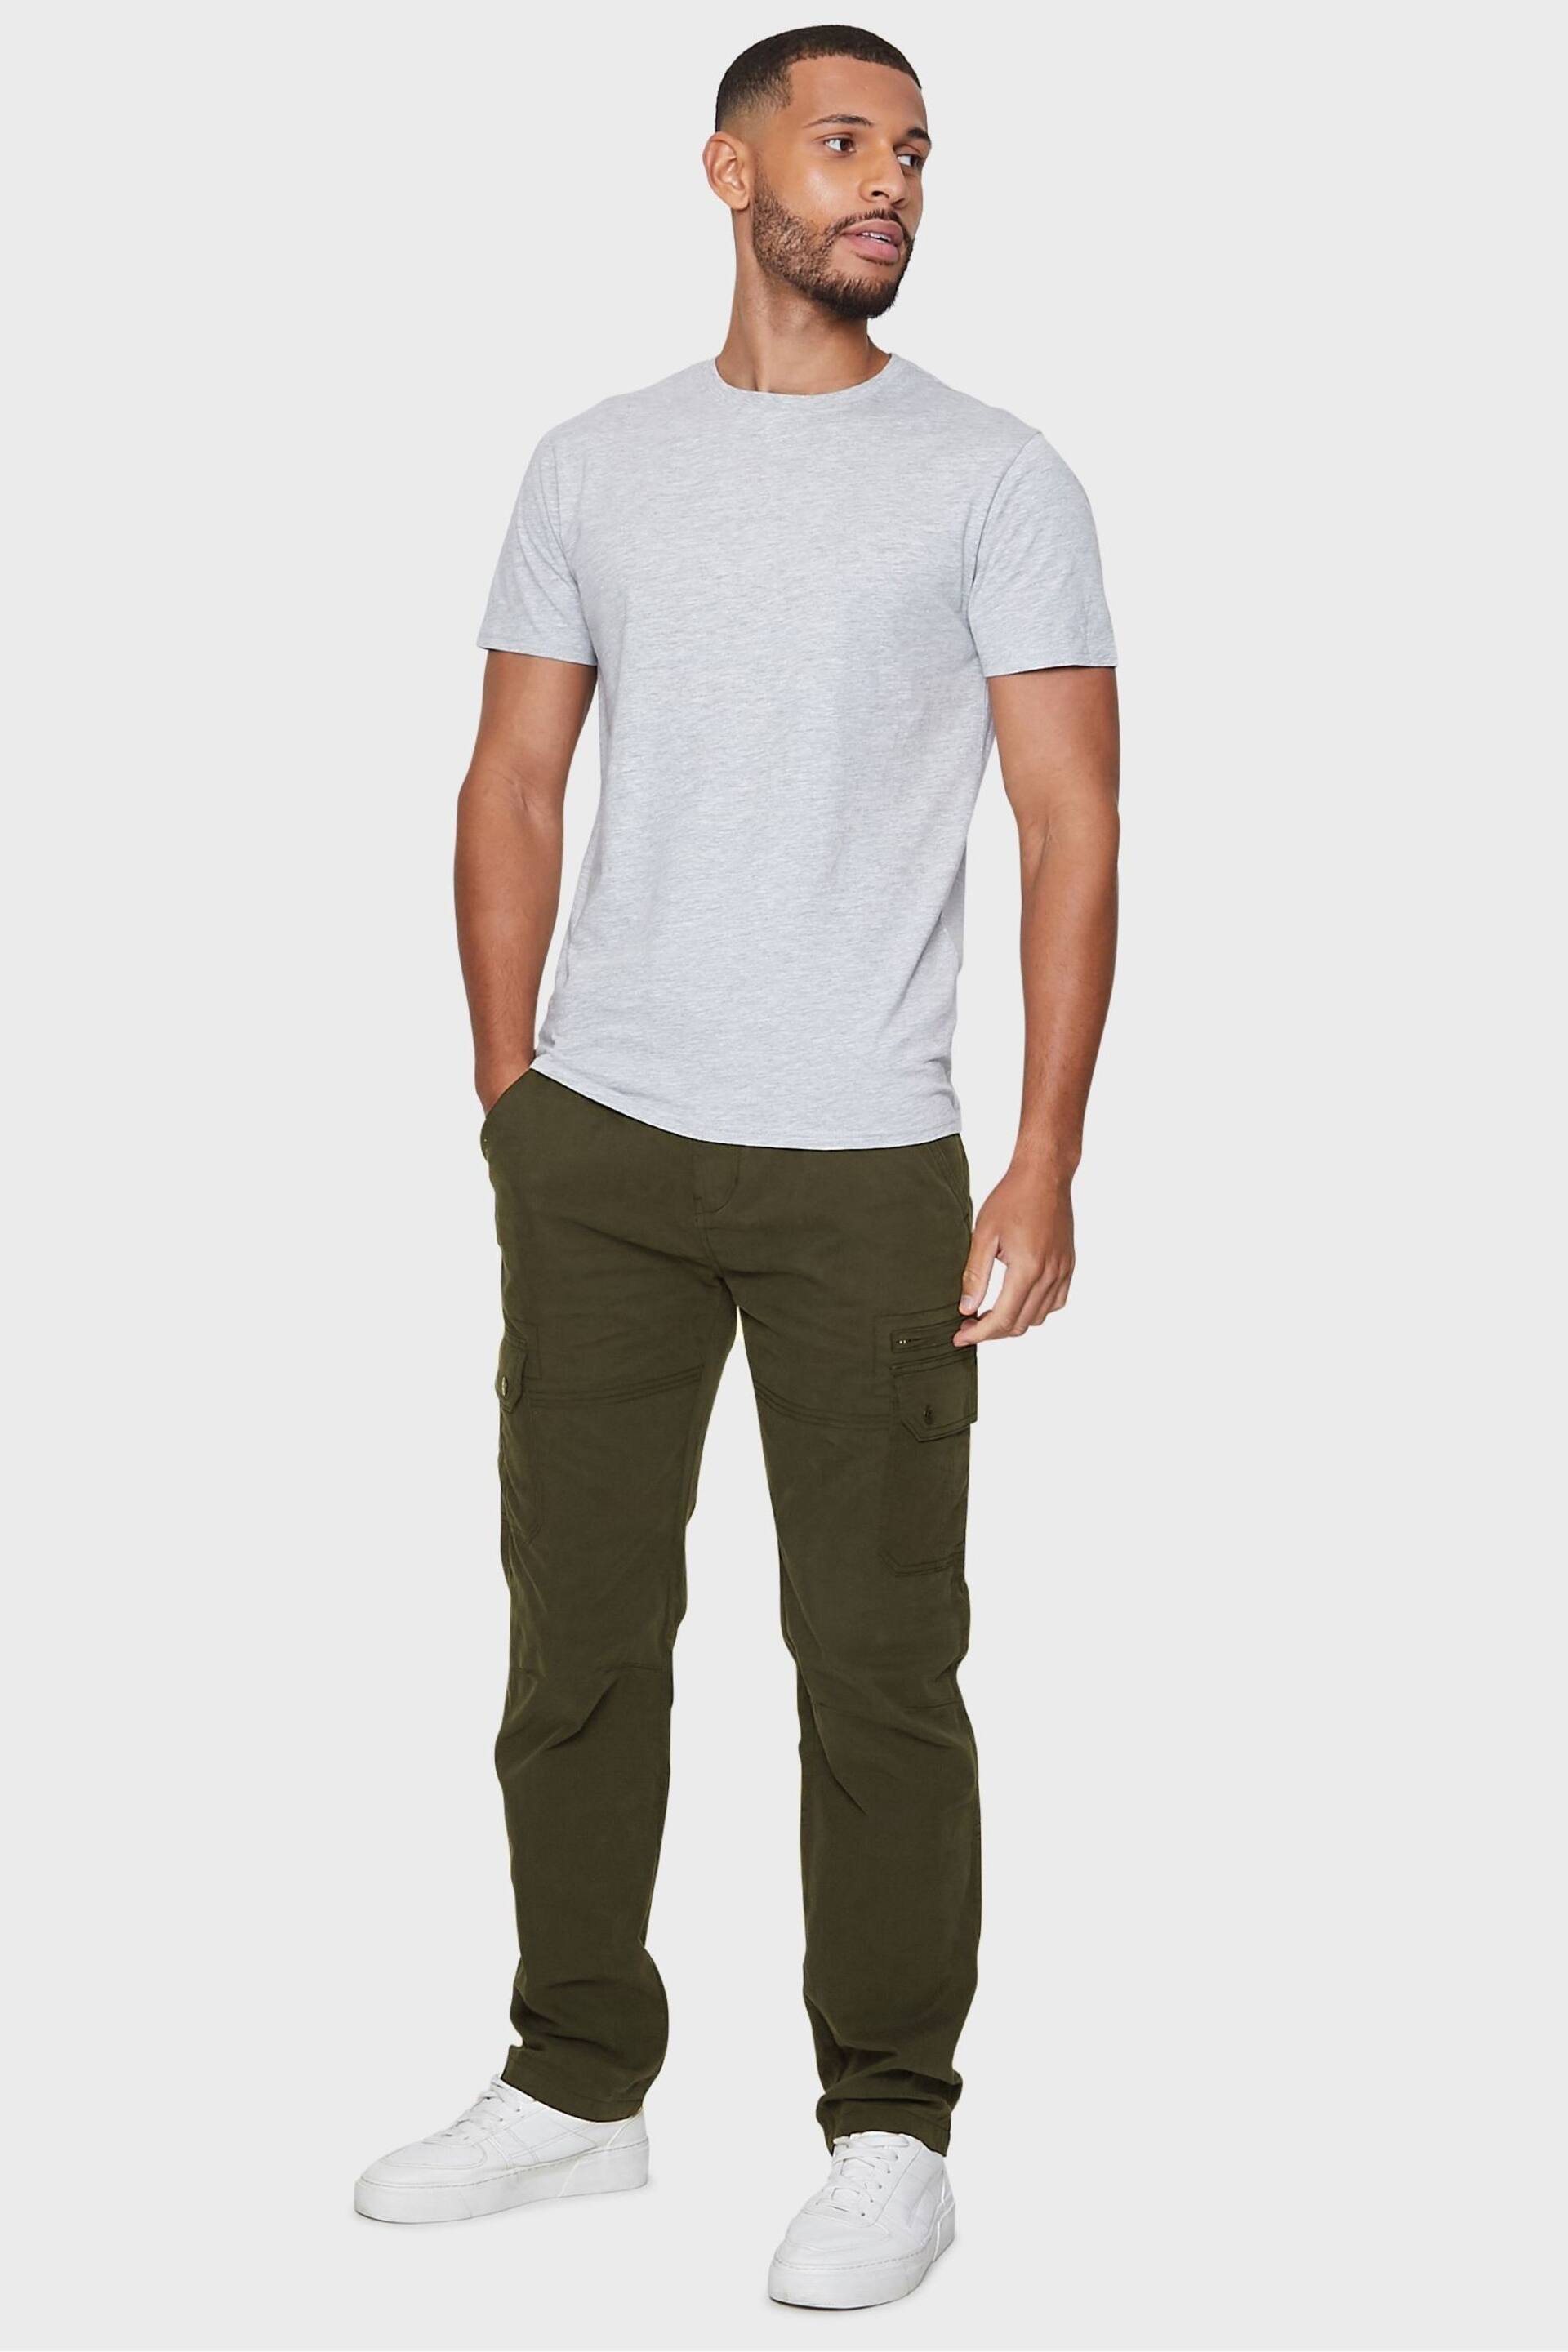 Threadbare Green Cotton Blend Belted Cargo Trousers - Image 3 of 4